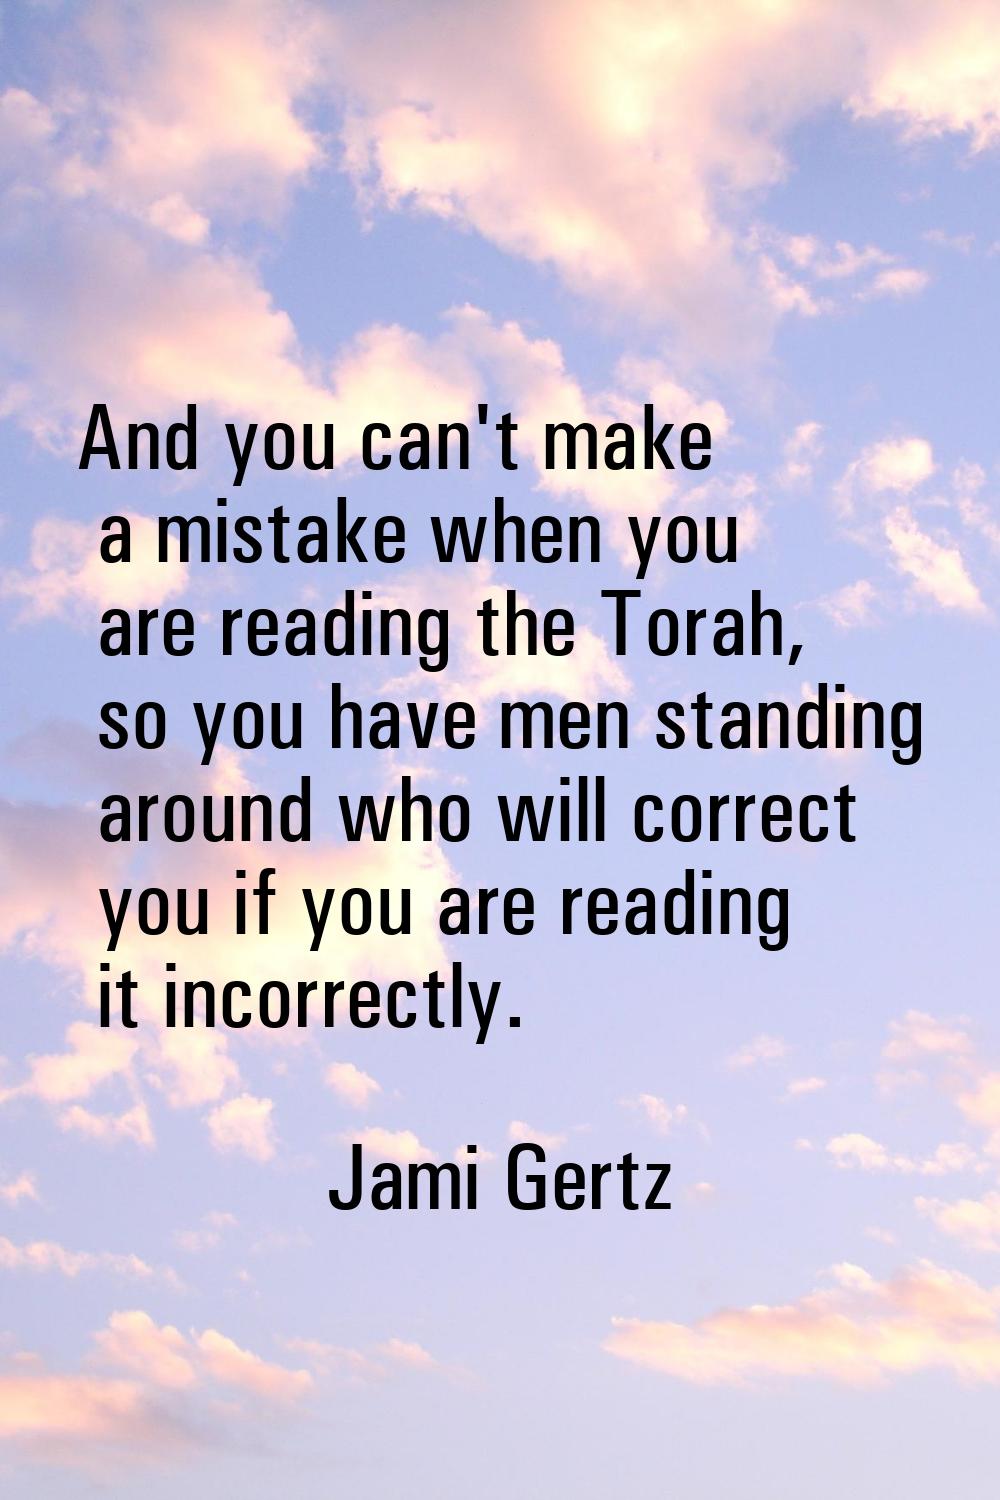 And you can't make a mistake when you are reading the Torah, so you have men standing around who wi